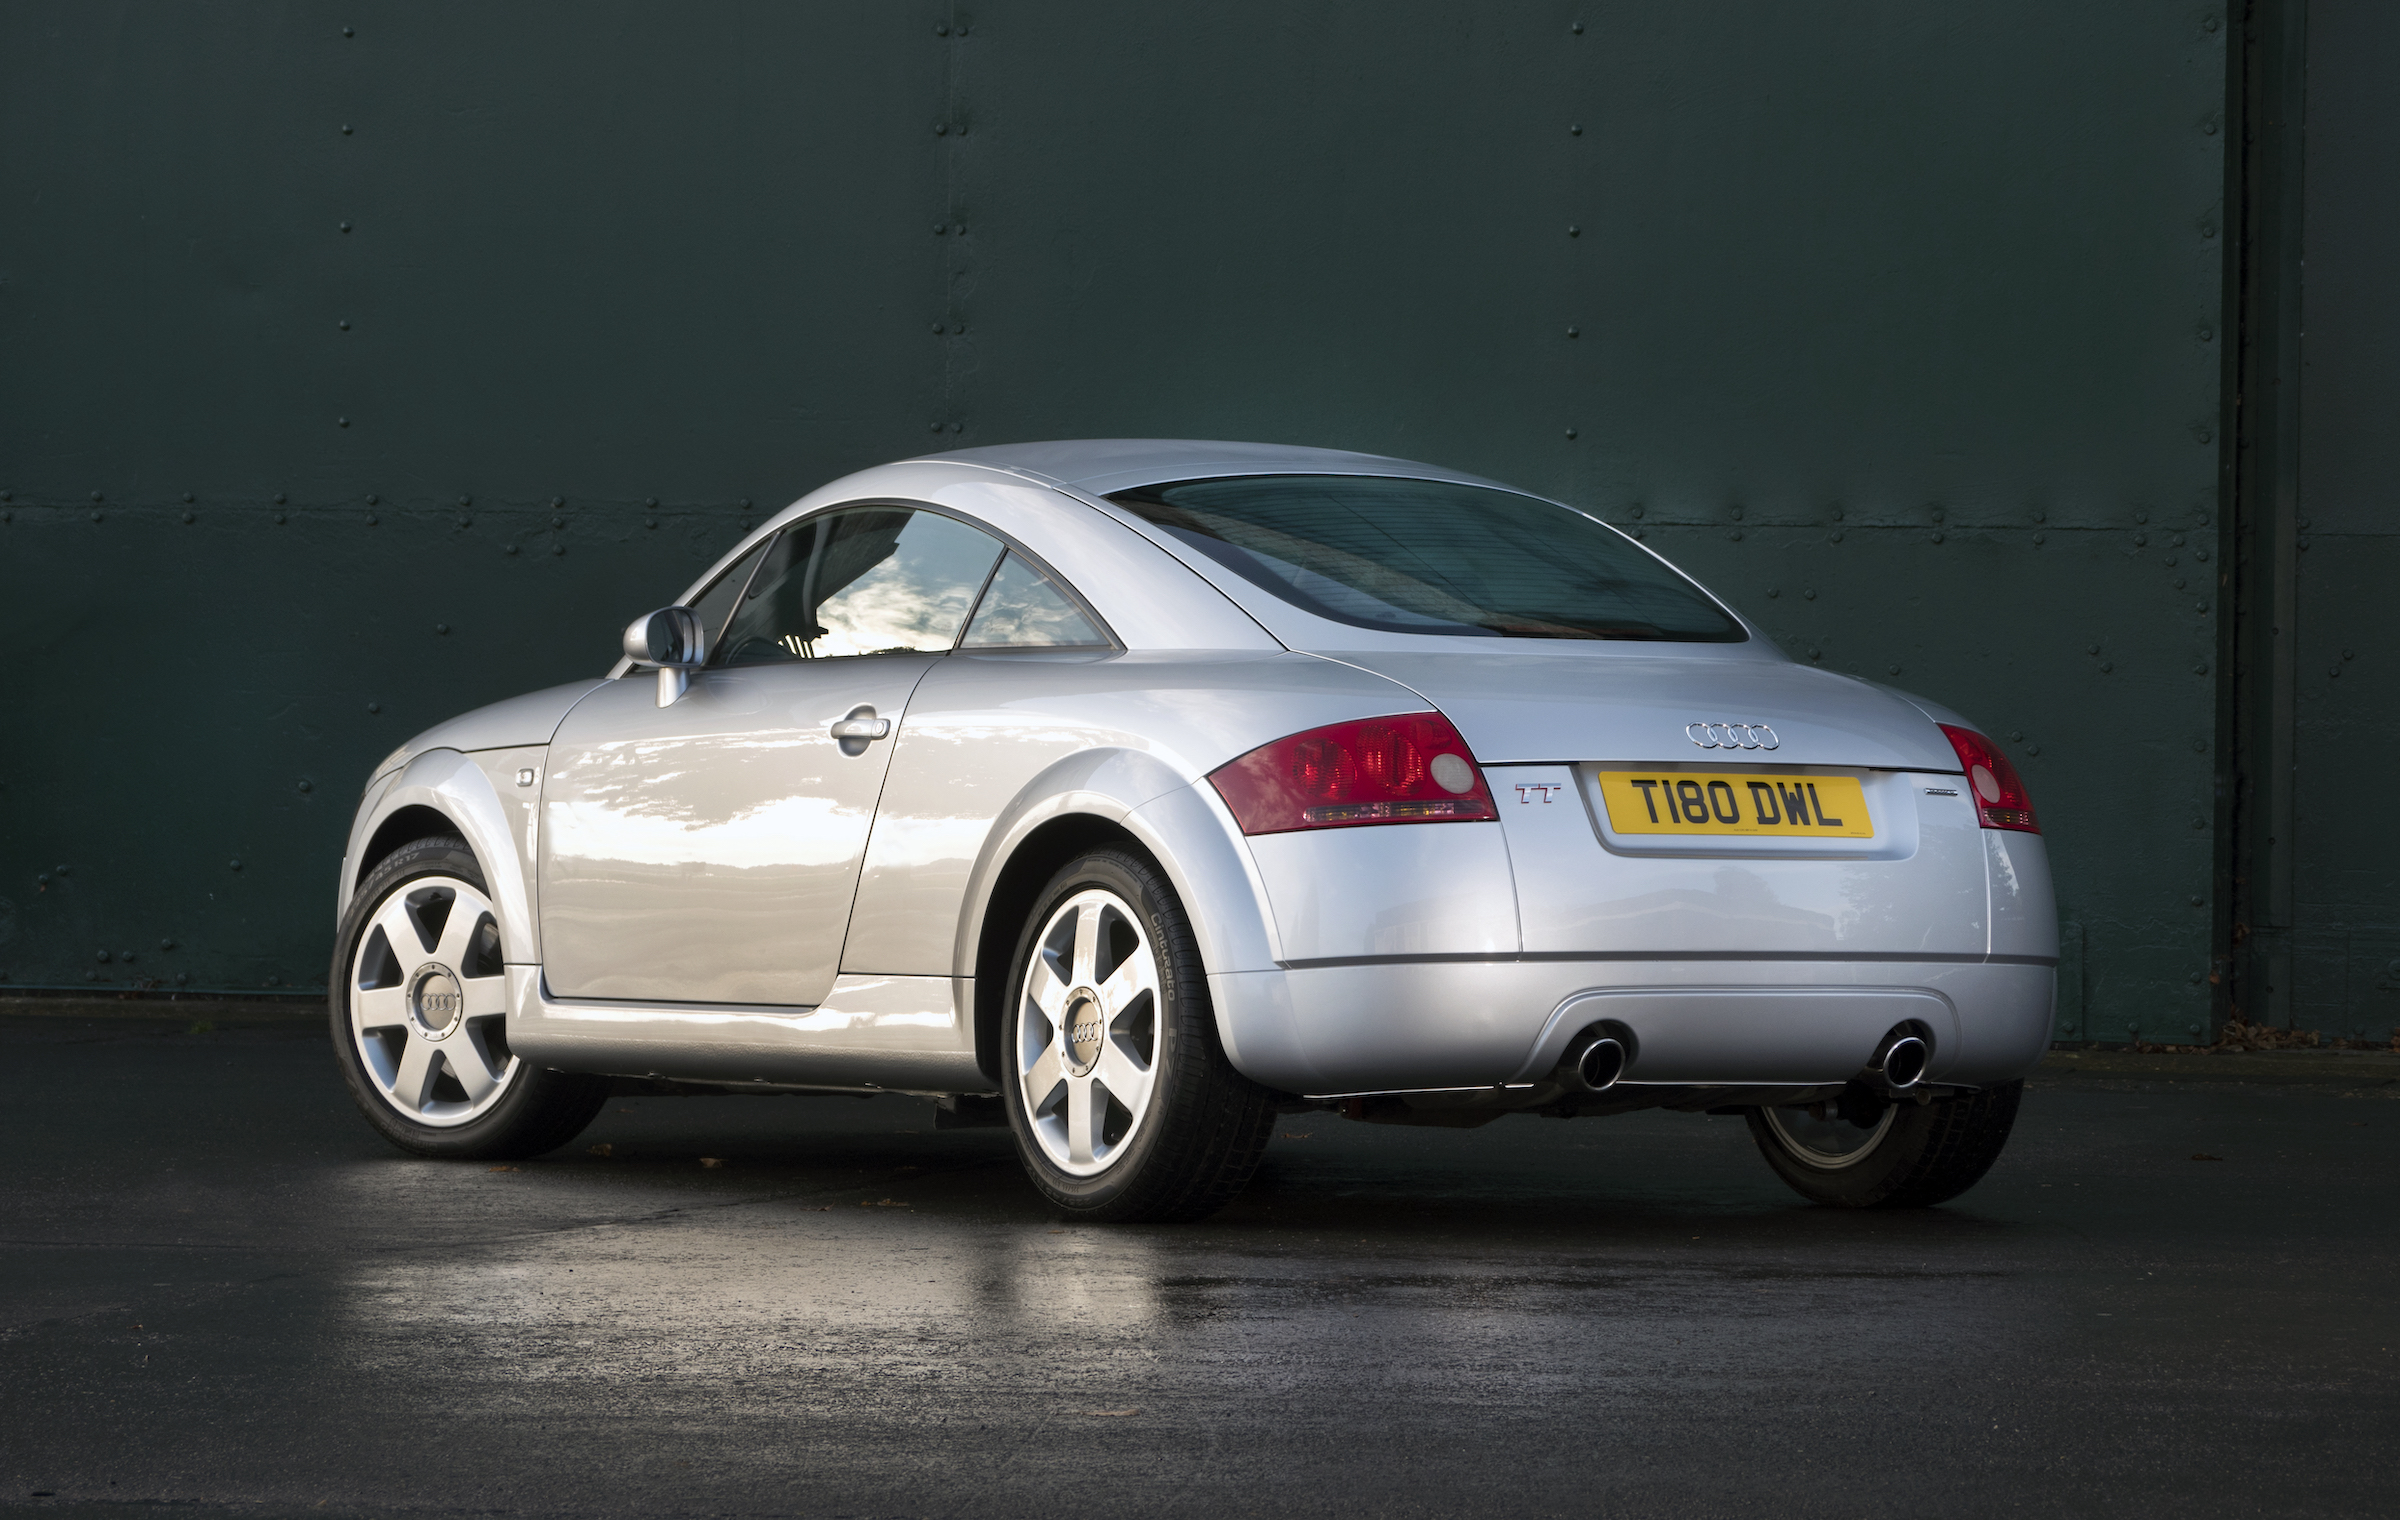 Audi TT Coupe images (6 of 8)